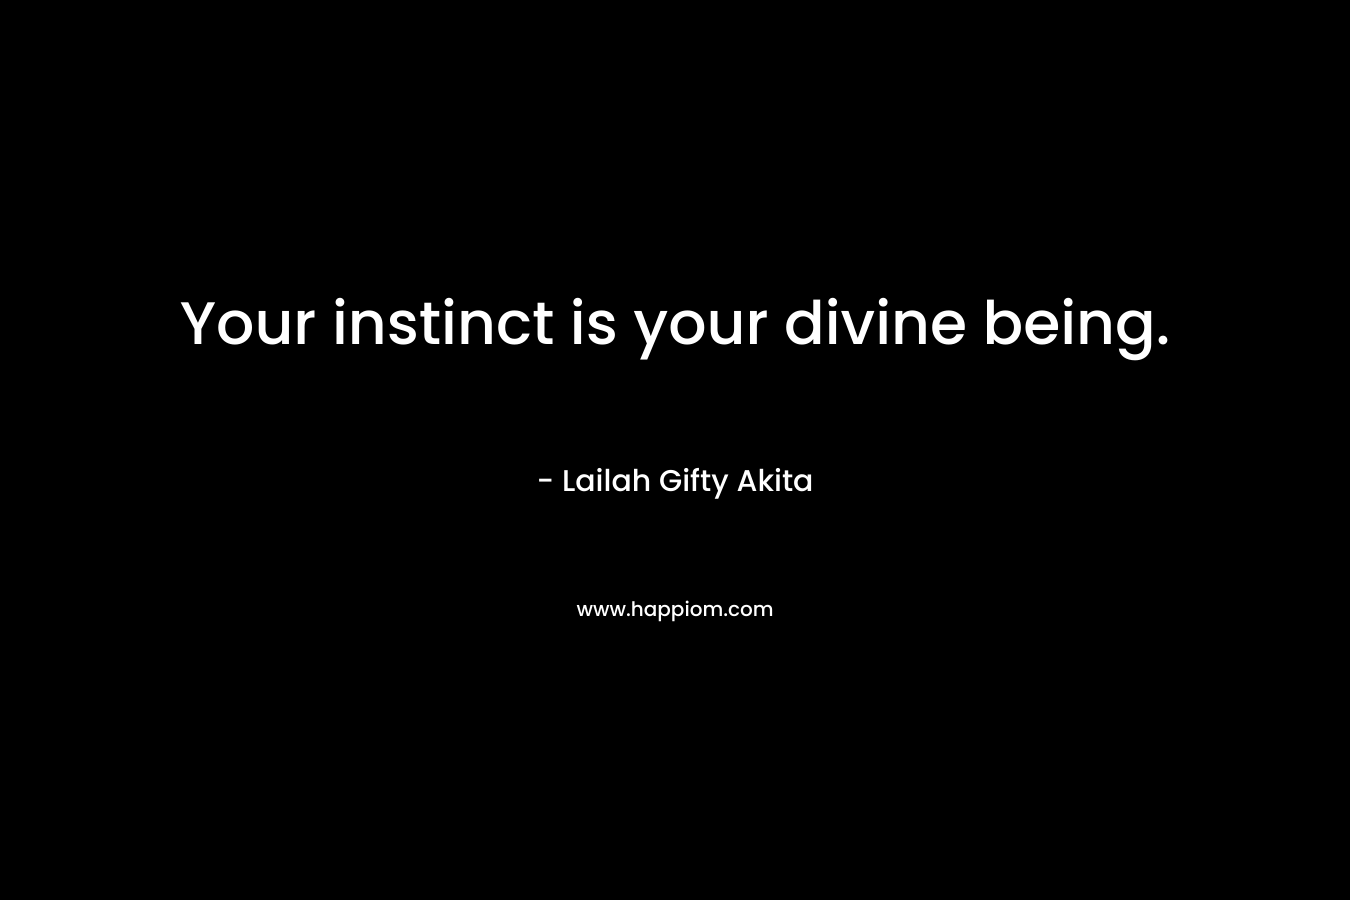 Your instinct is your divine being.